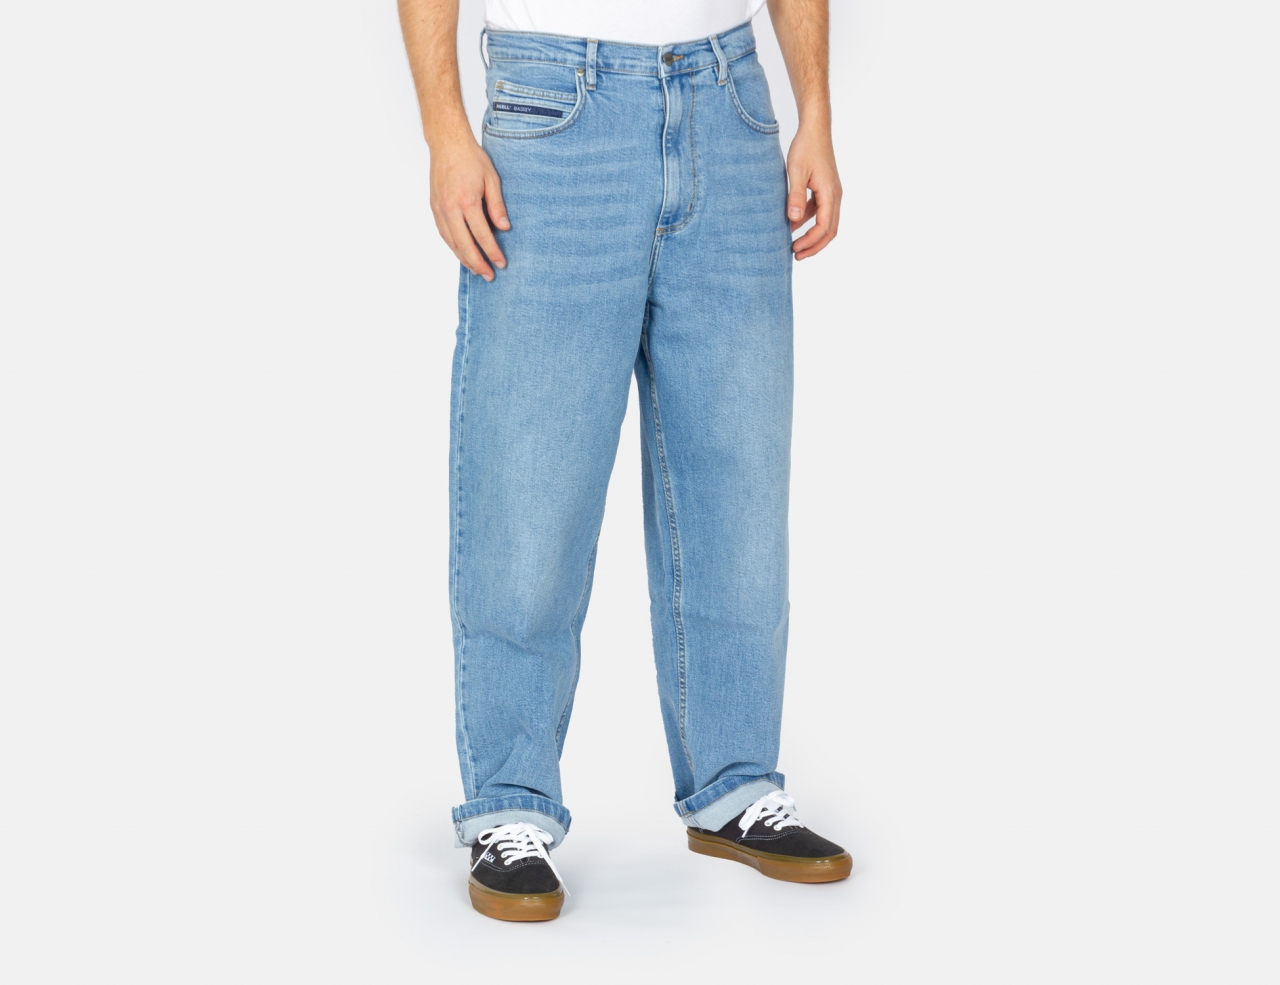 Reell Jeans Baggy Jeans - Light Blue Stone